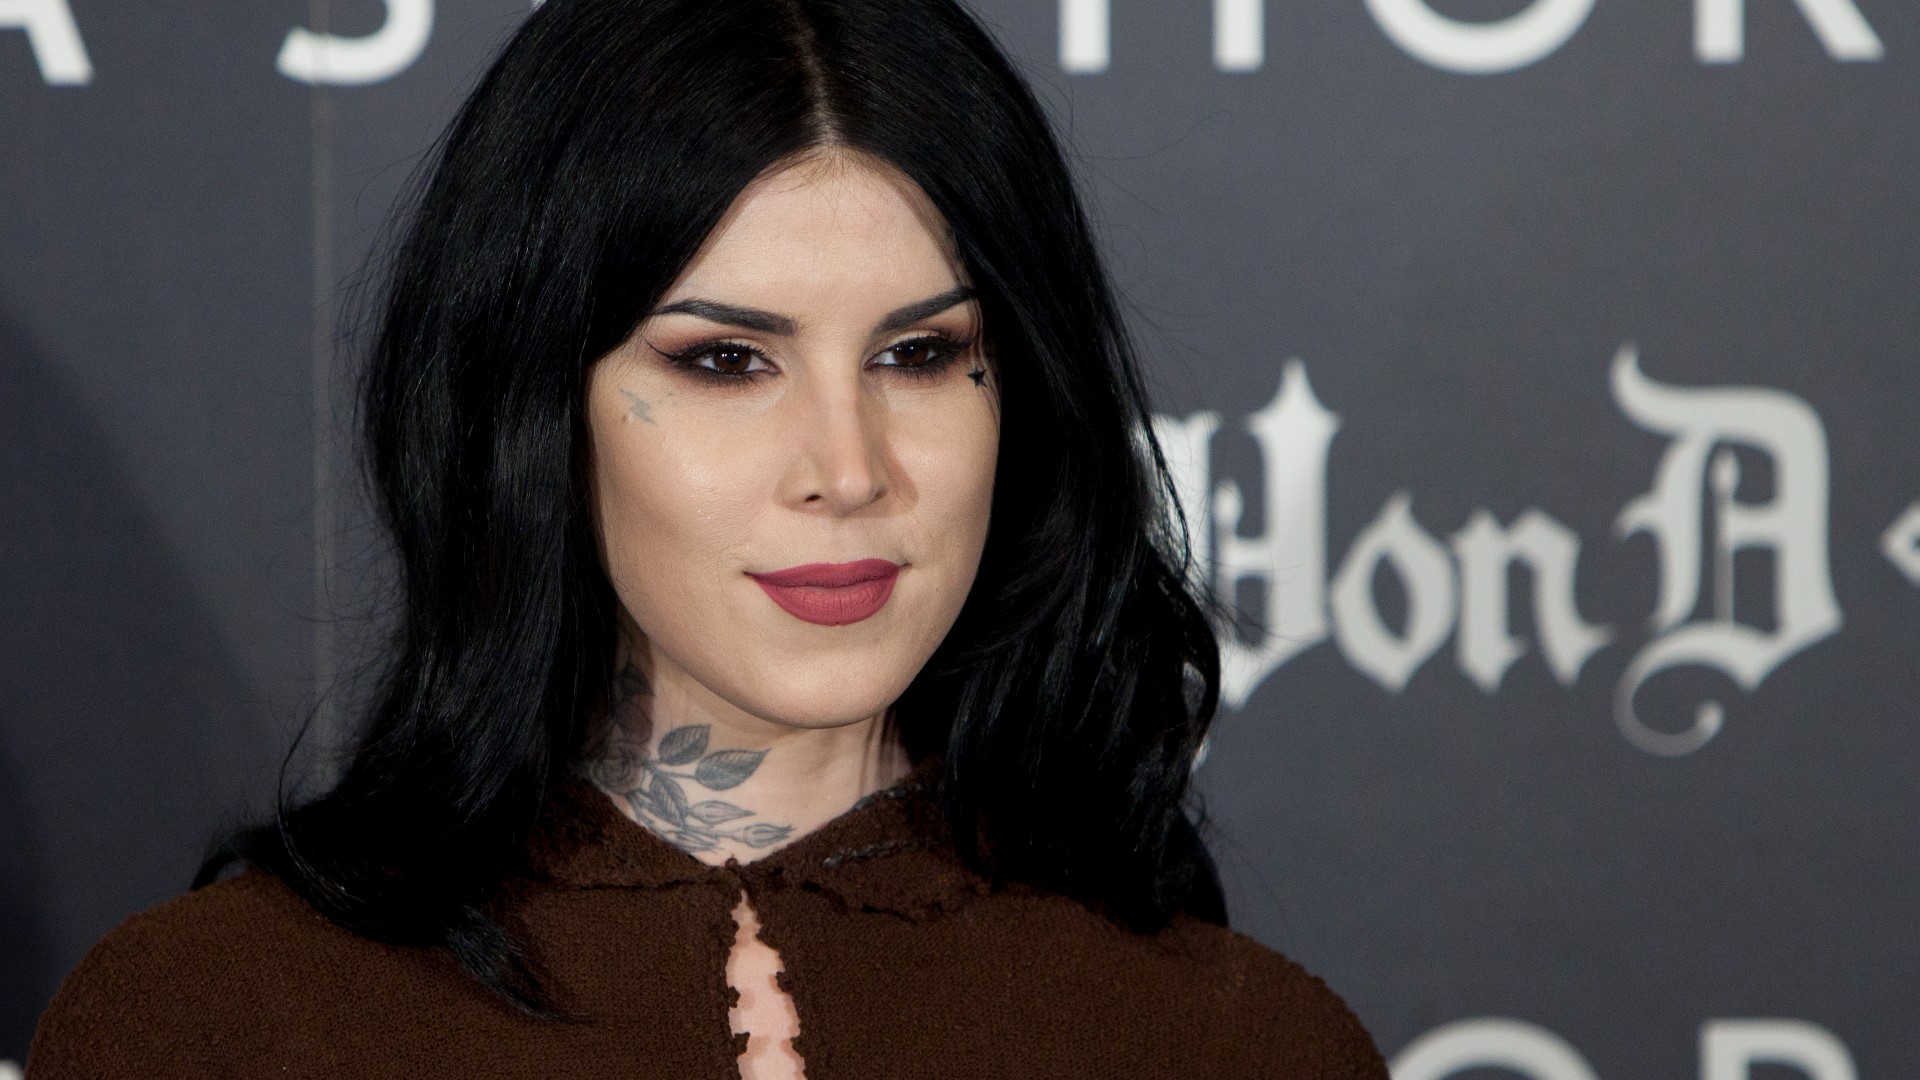 Famous tattoo artist, pin-up girl and reality TV star Kat Von D is moving to Indiana.